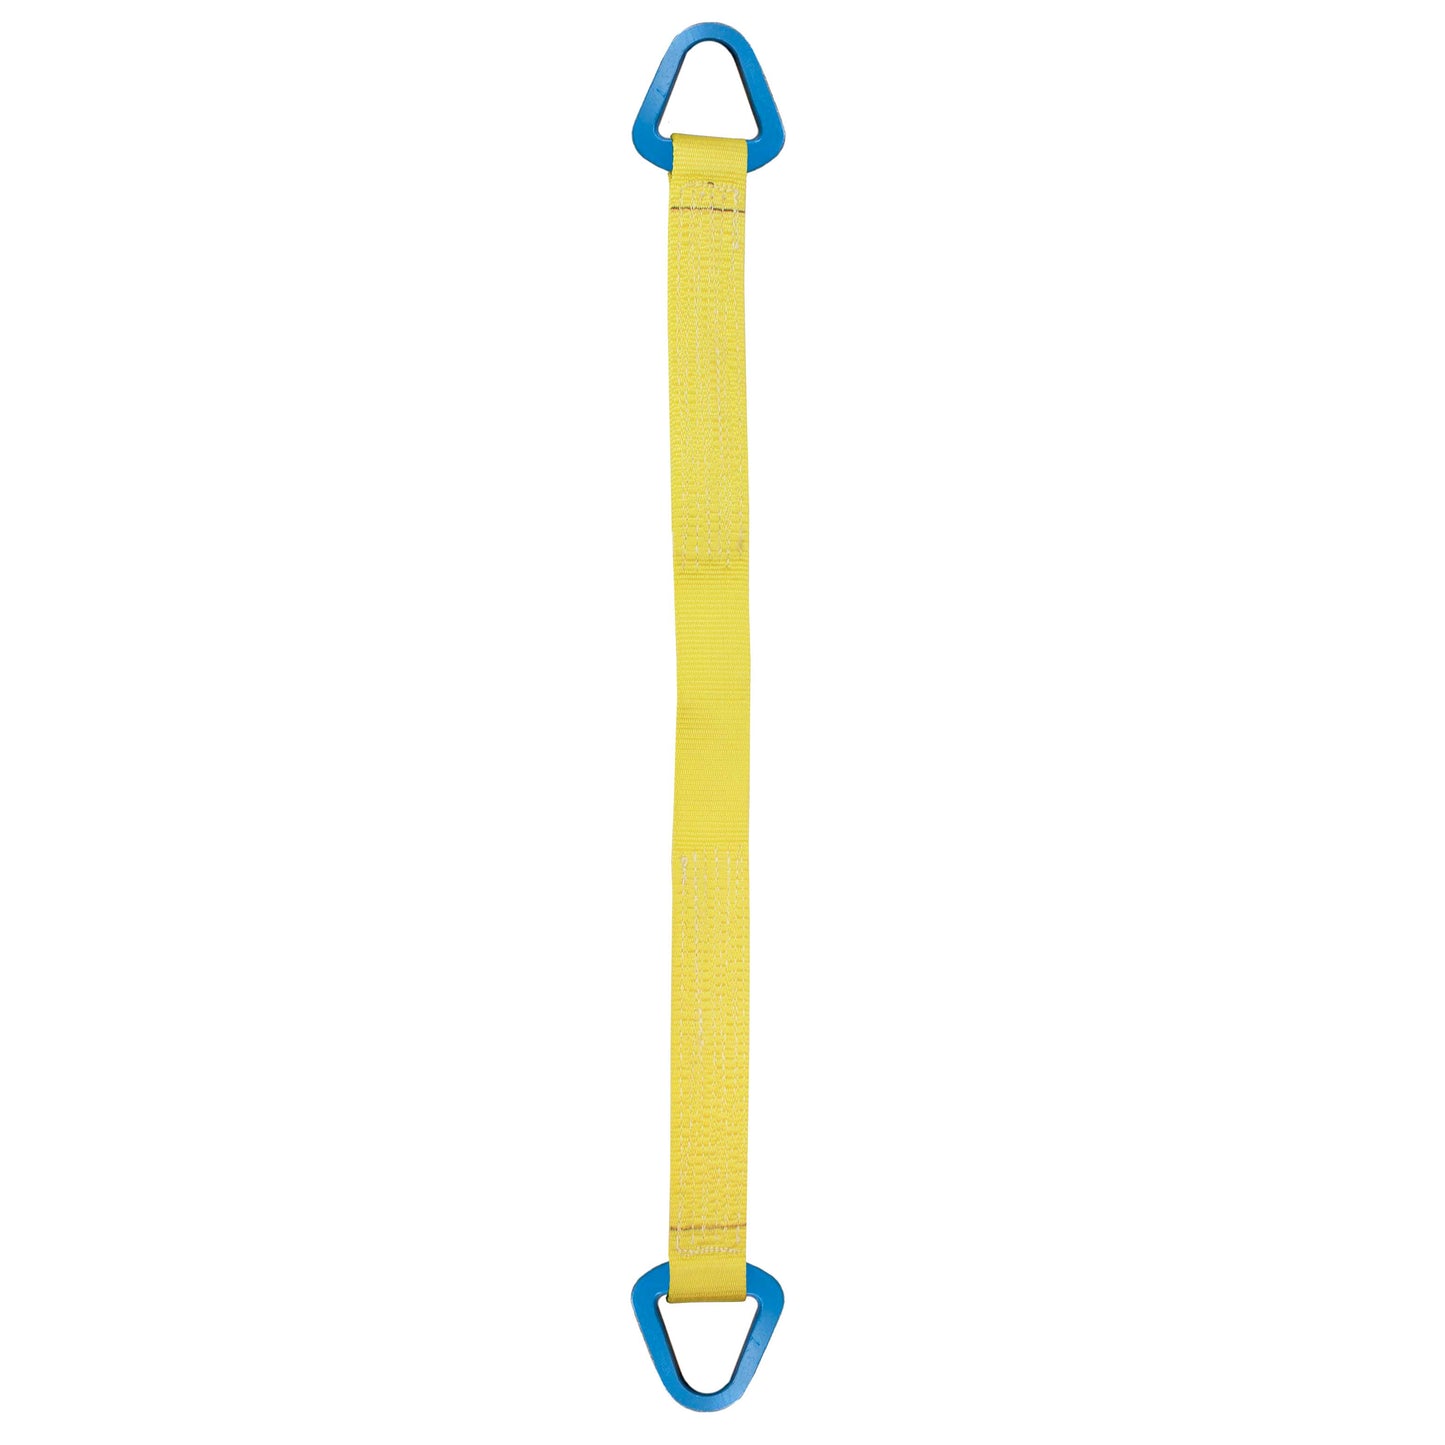 Nylon Lifting Sling Triangle 3 inch x 10 foot 2ply image 1 of 2